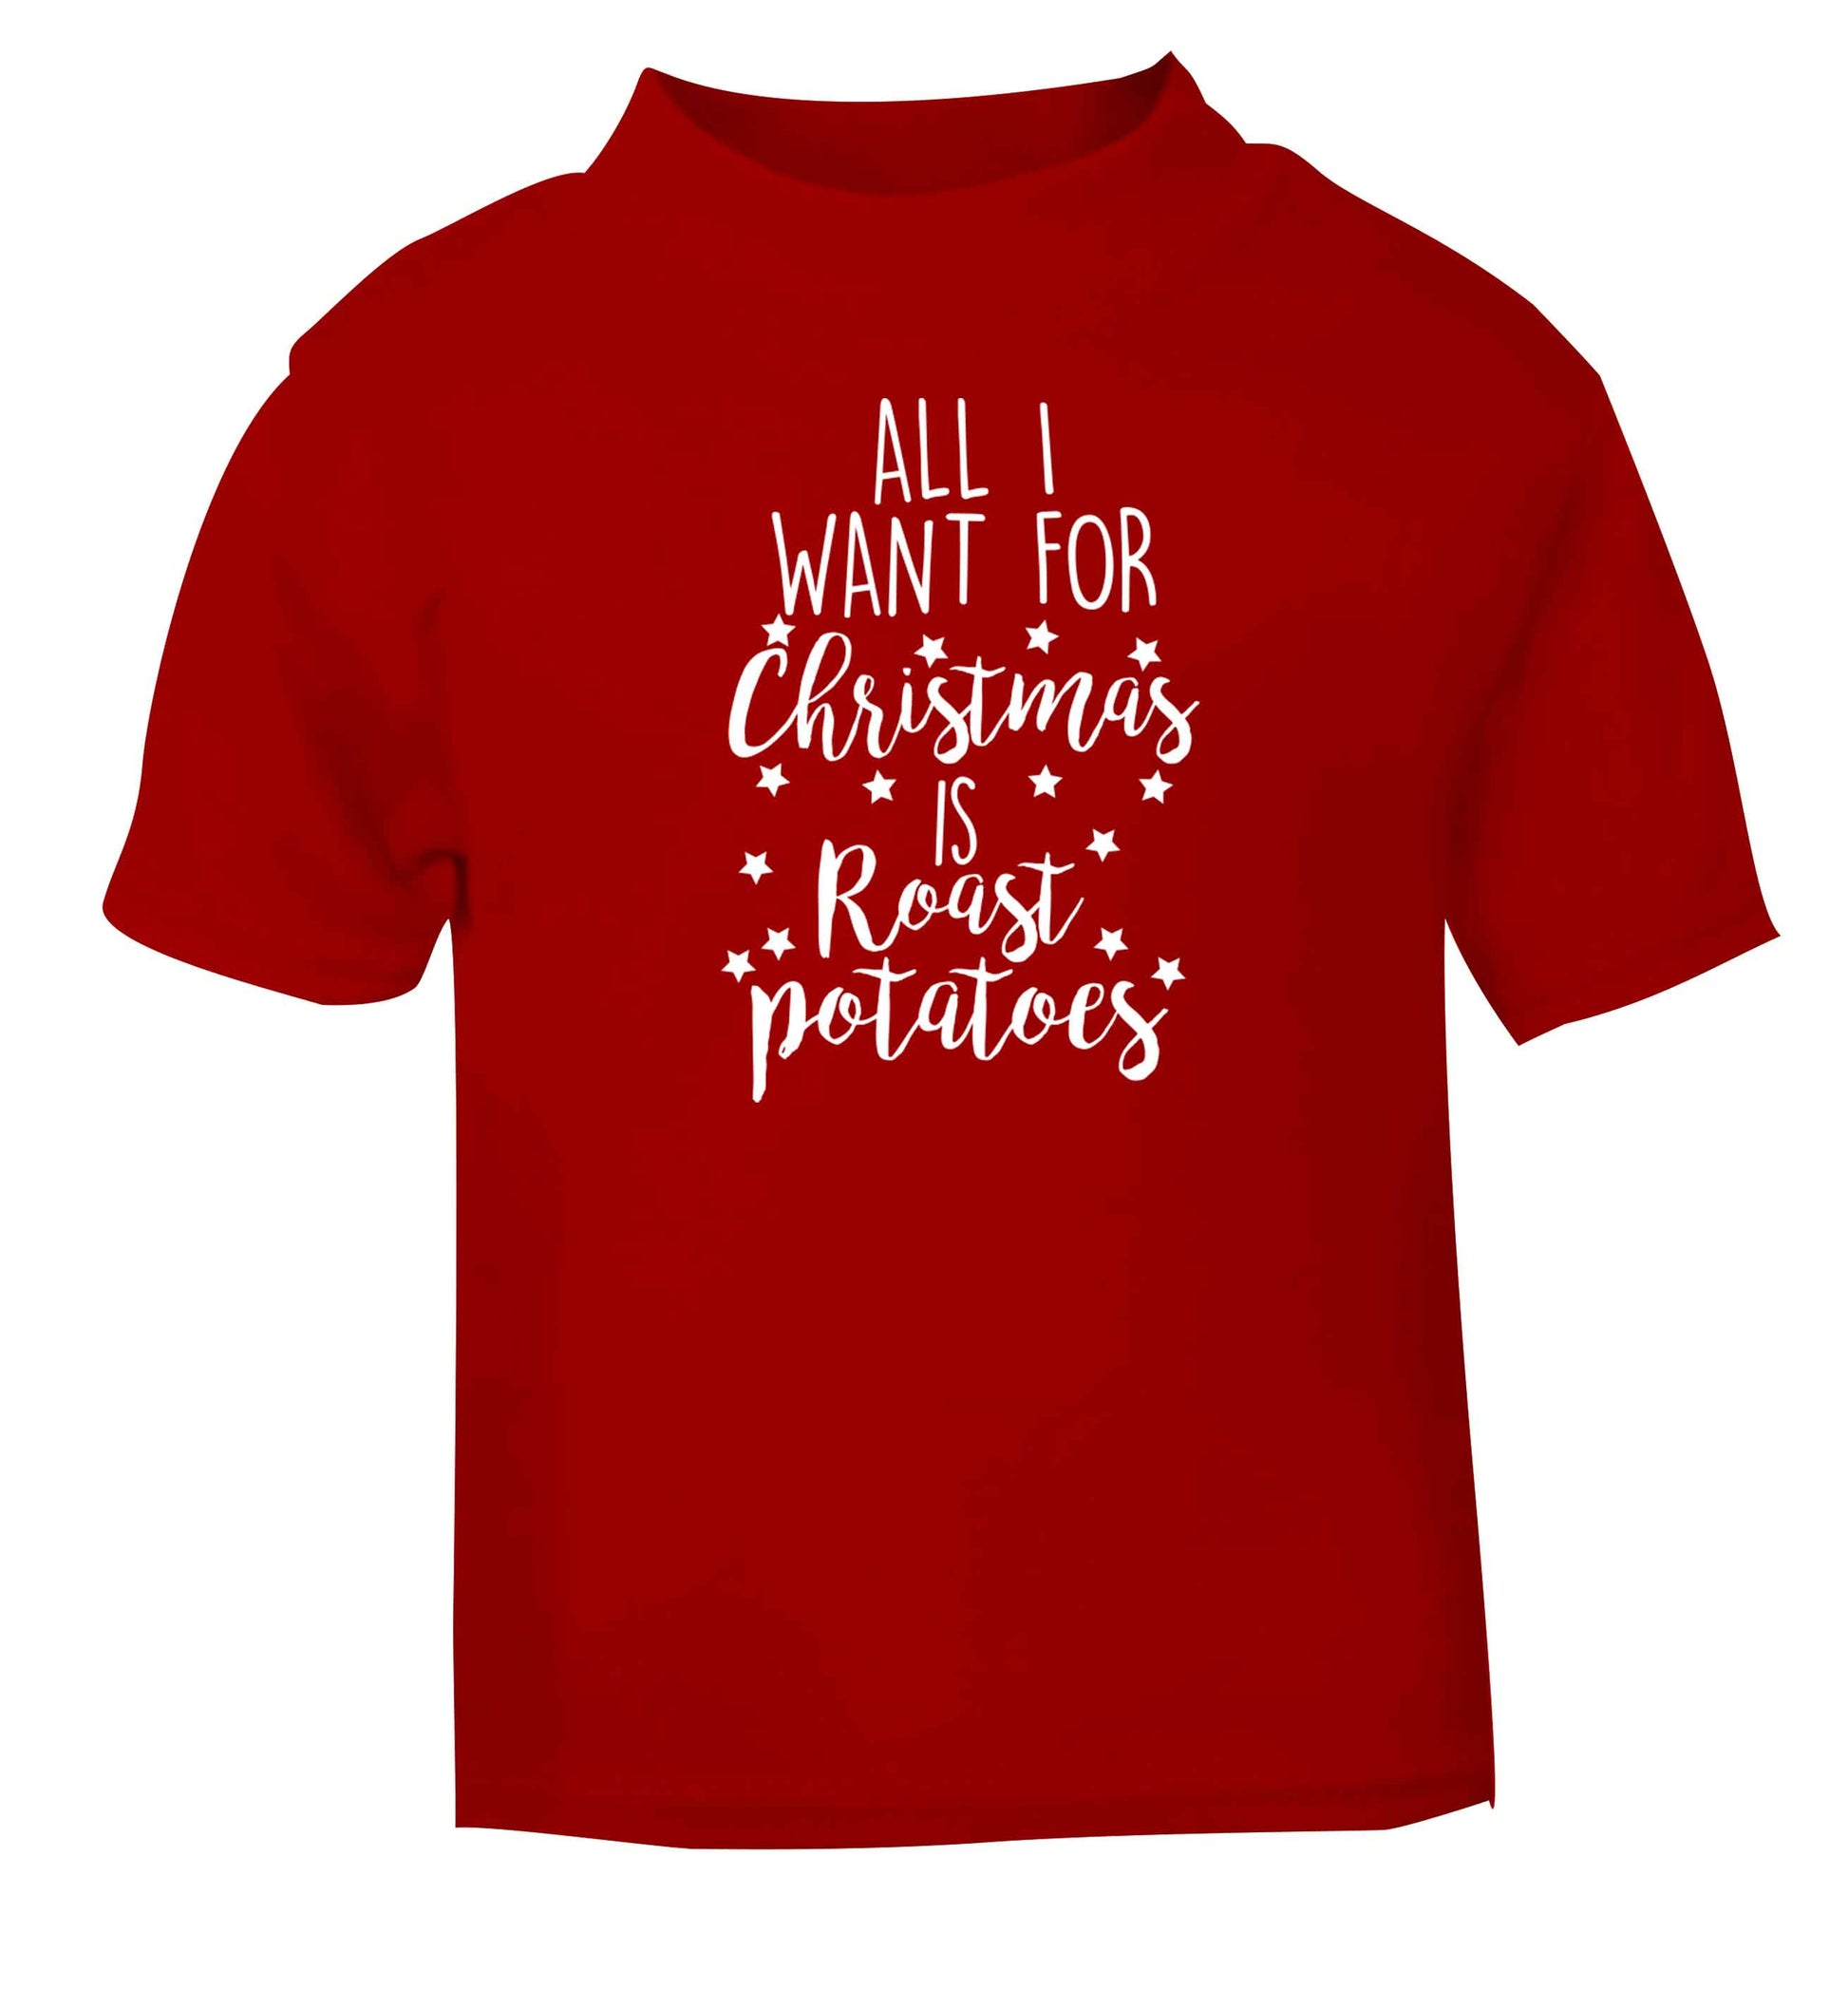 All I want for Christmas is roast potatoes red baby toddler Tshirt 2 Years